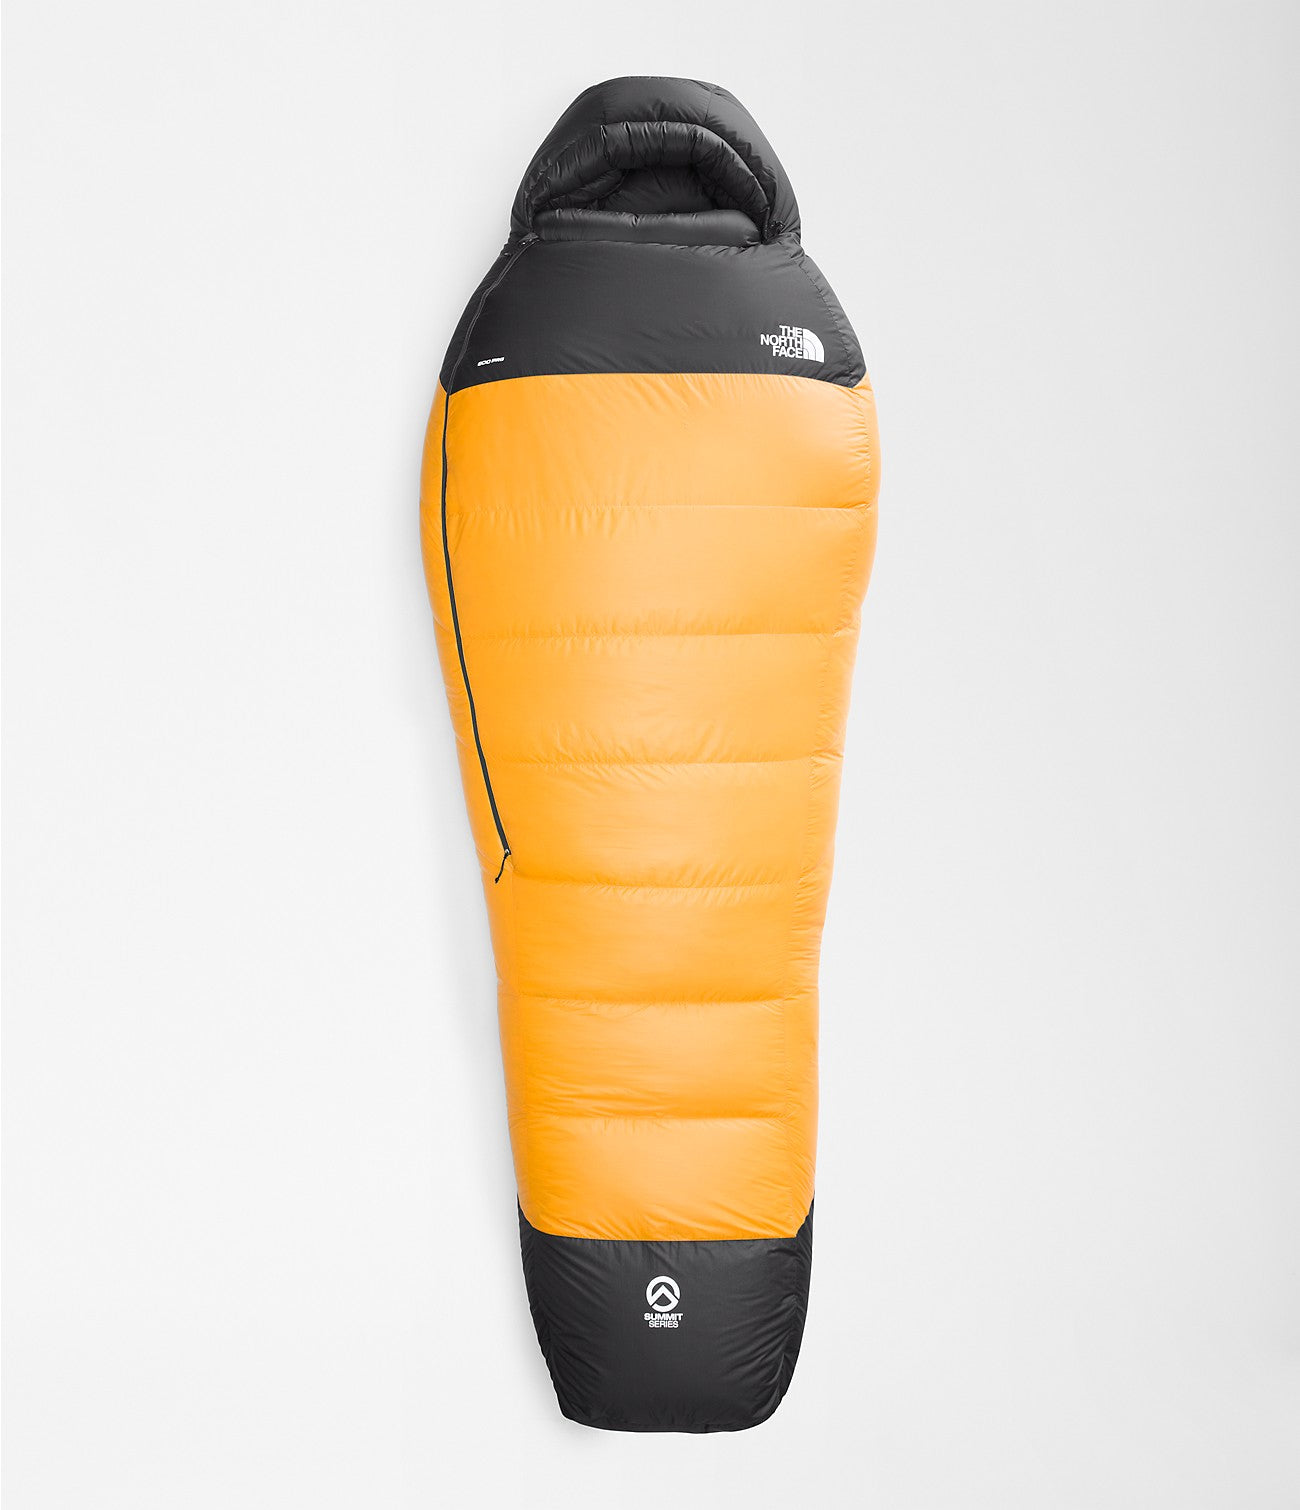 The North Face Inferno-40F/-40C Down Sleeping Bag